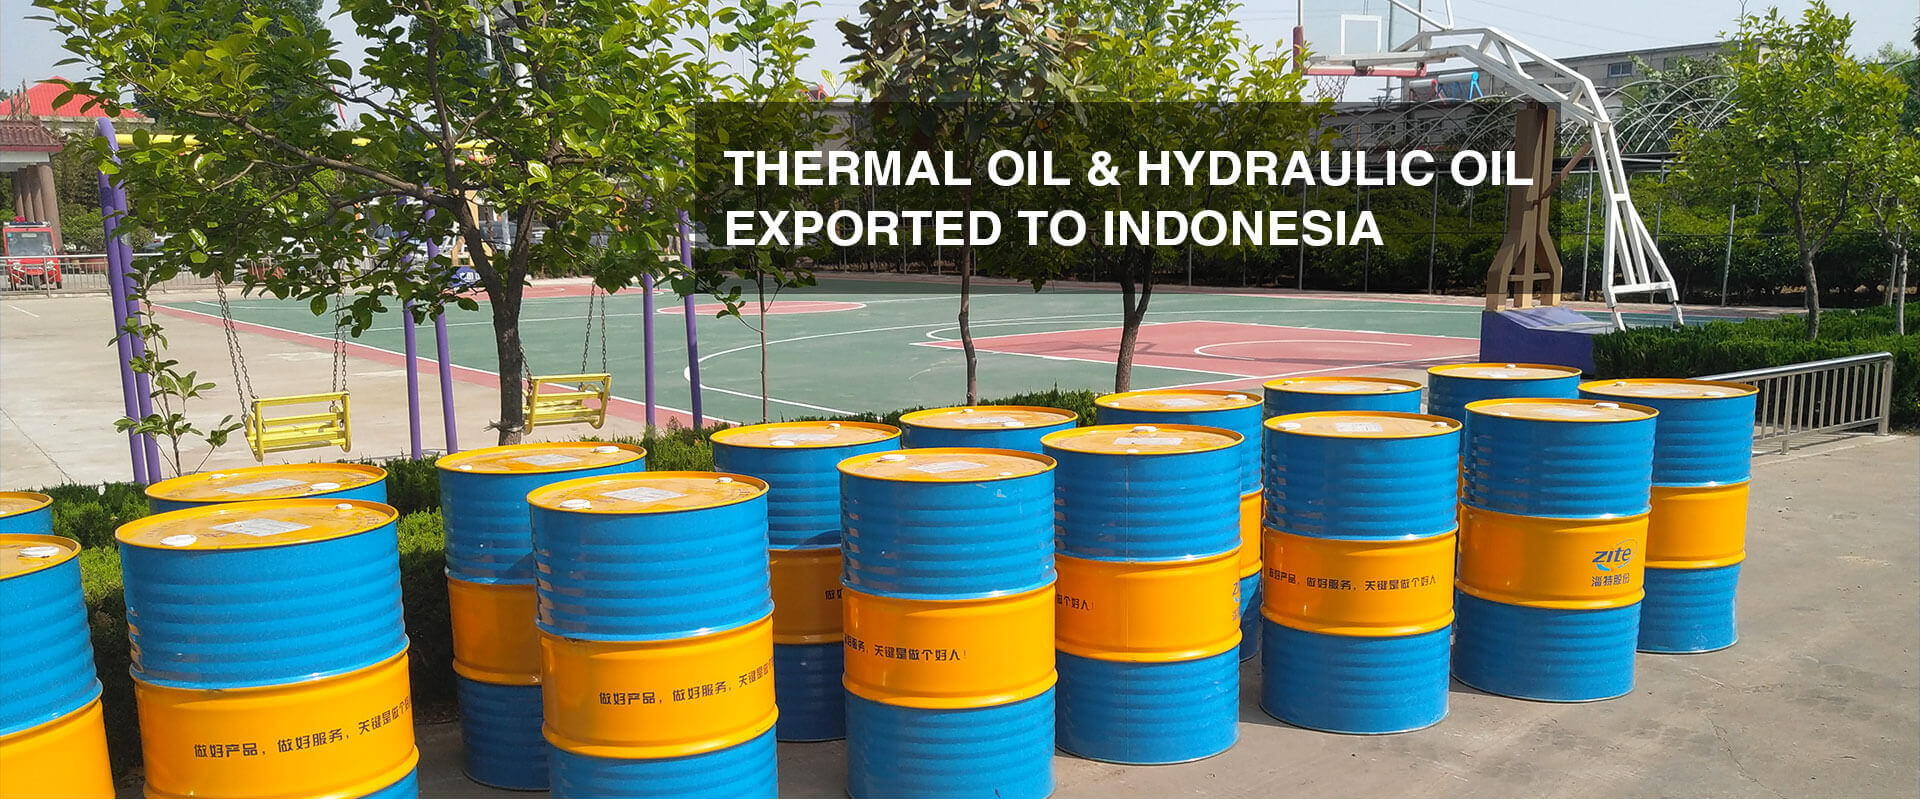 Thermal Oil & Hydraulic Oil Exported to Indonesia